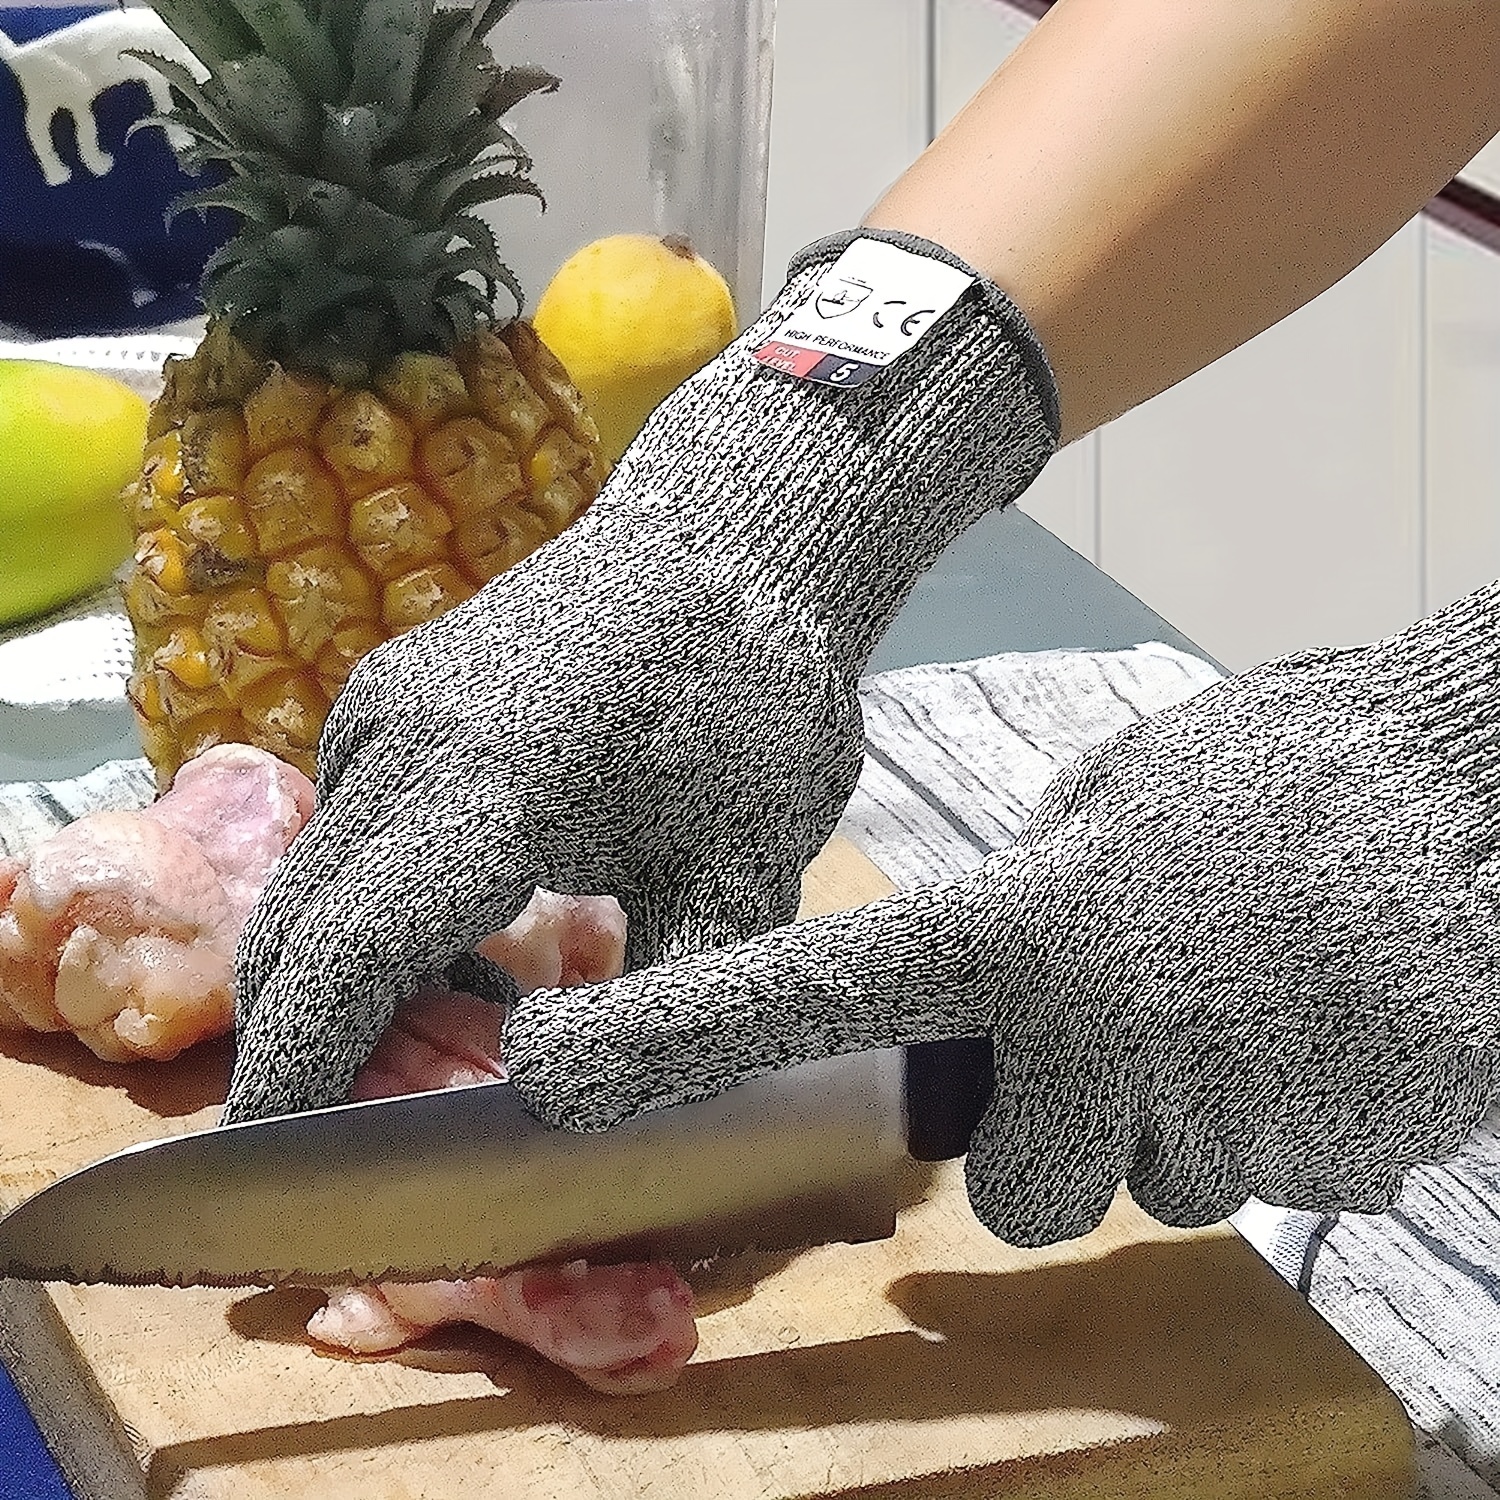 2 Pairs Level 5 Cut Resistant Gloves, Food Grade Material, Kitchen Work  Glove, Oyster Shelling, Fish Filleting, Meat Cutting, Carving, Gray, Xl